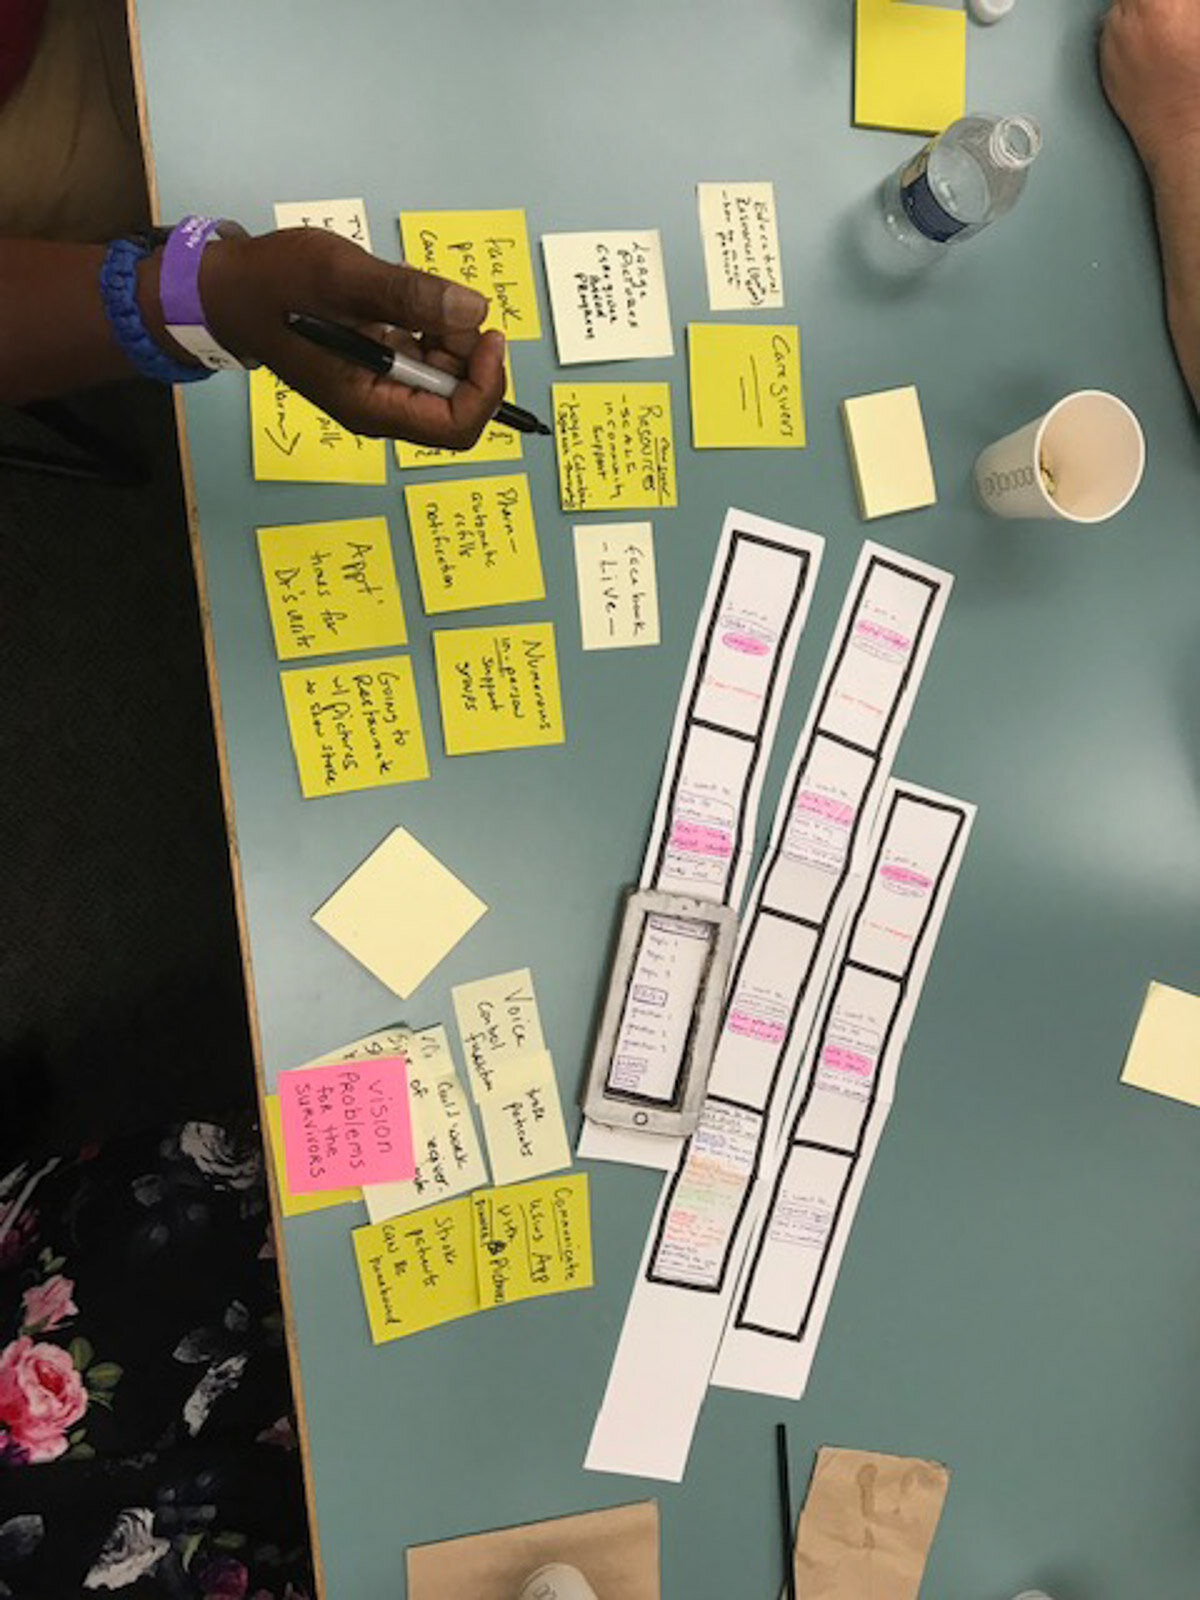  Human-centered design session by CHE team for American Heart Association participants, June 2019 in Baltimore. 